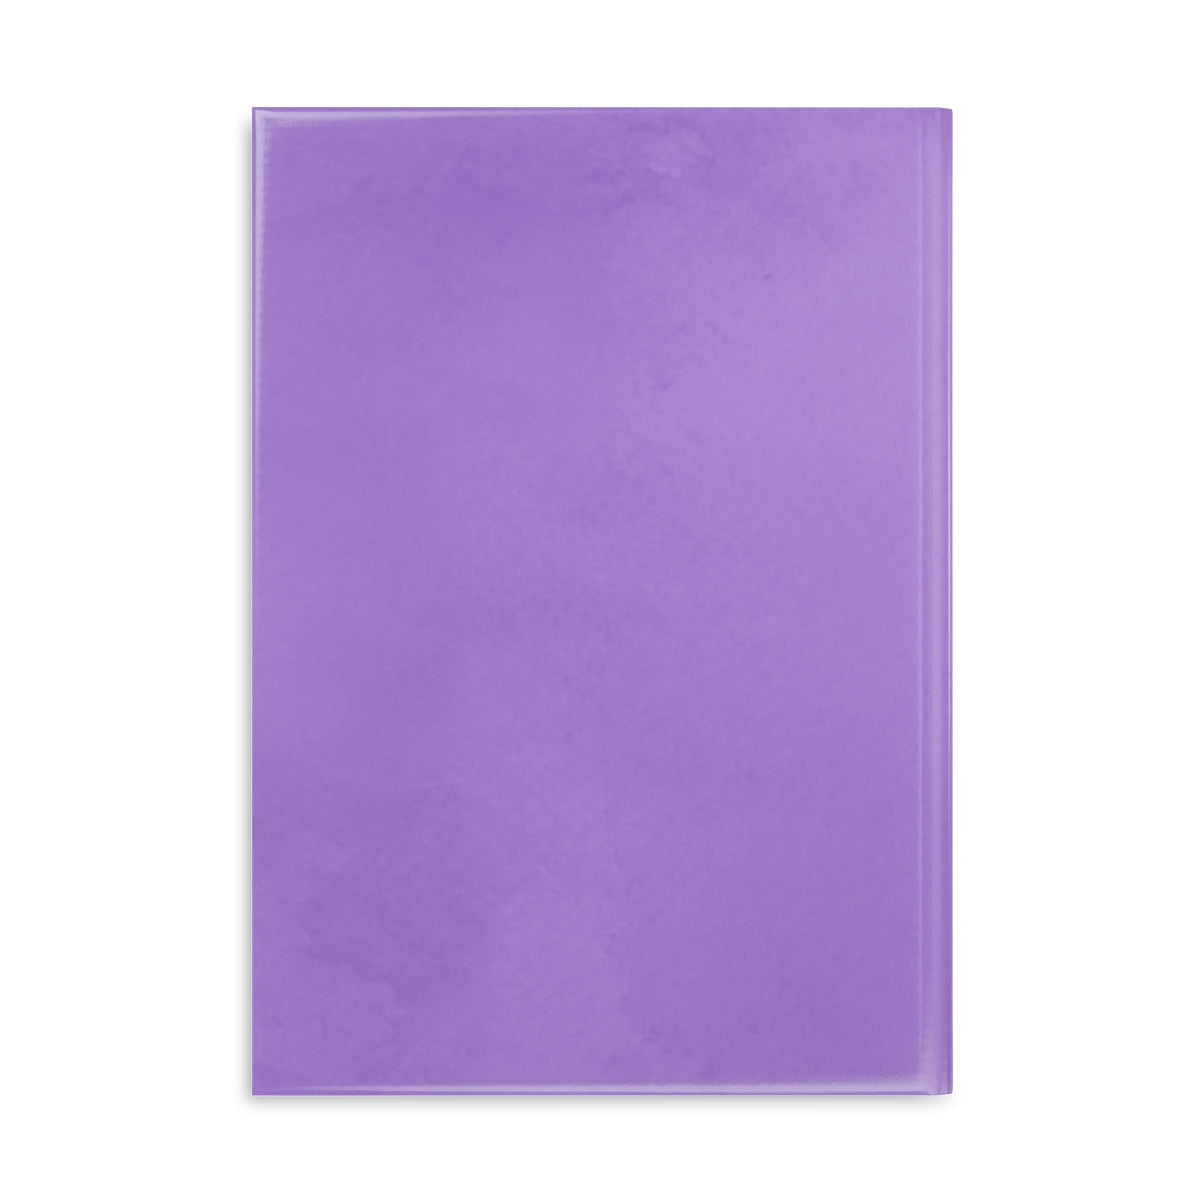 Simply Lovable Logo Hardcover Notebook with Puffy Covers